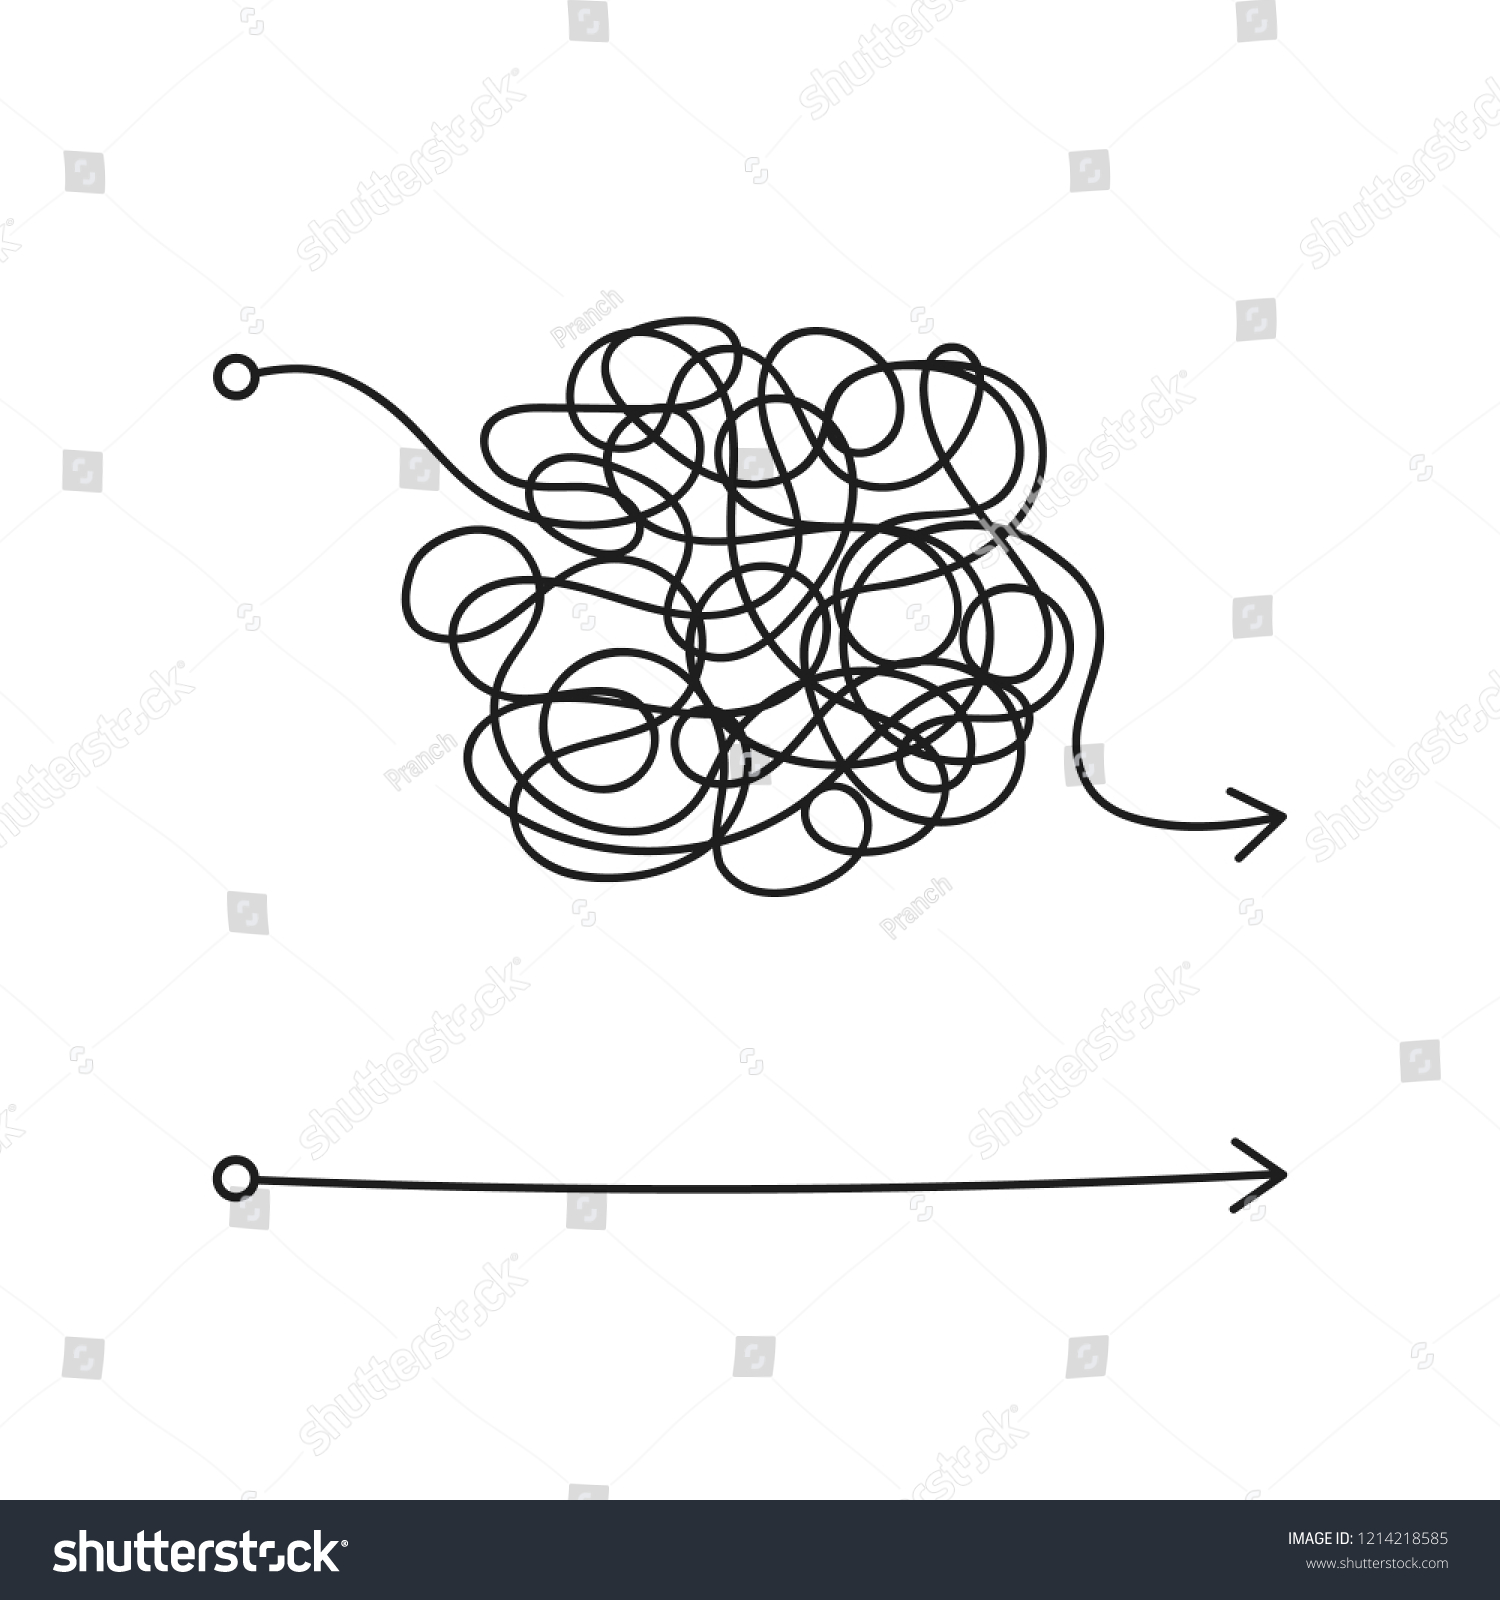 messy line like hard and easy way. flat linear trend modern art graphic random quiz design ball element isolated on white. concept of true and false path or straight and winding road or mind idea #1214218585